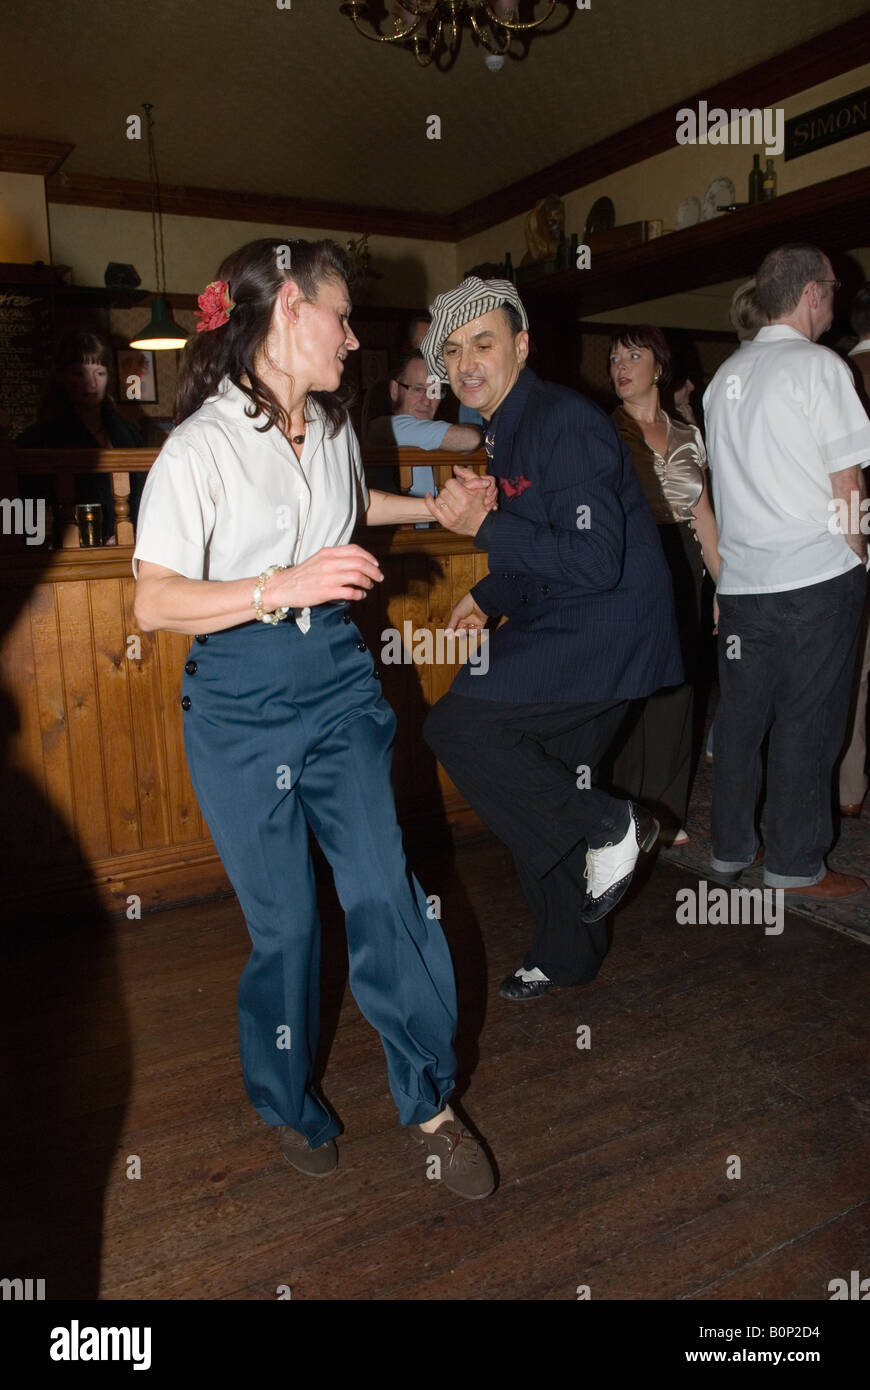 Pontins Holiday Camp, Camber Sands Sussex England. Rhythm Riot Retro Weekend couple dancing the jive, 2000s 2007 HOMER SYKES Stock Photo